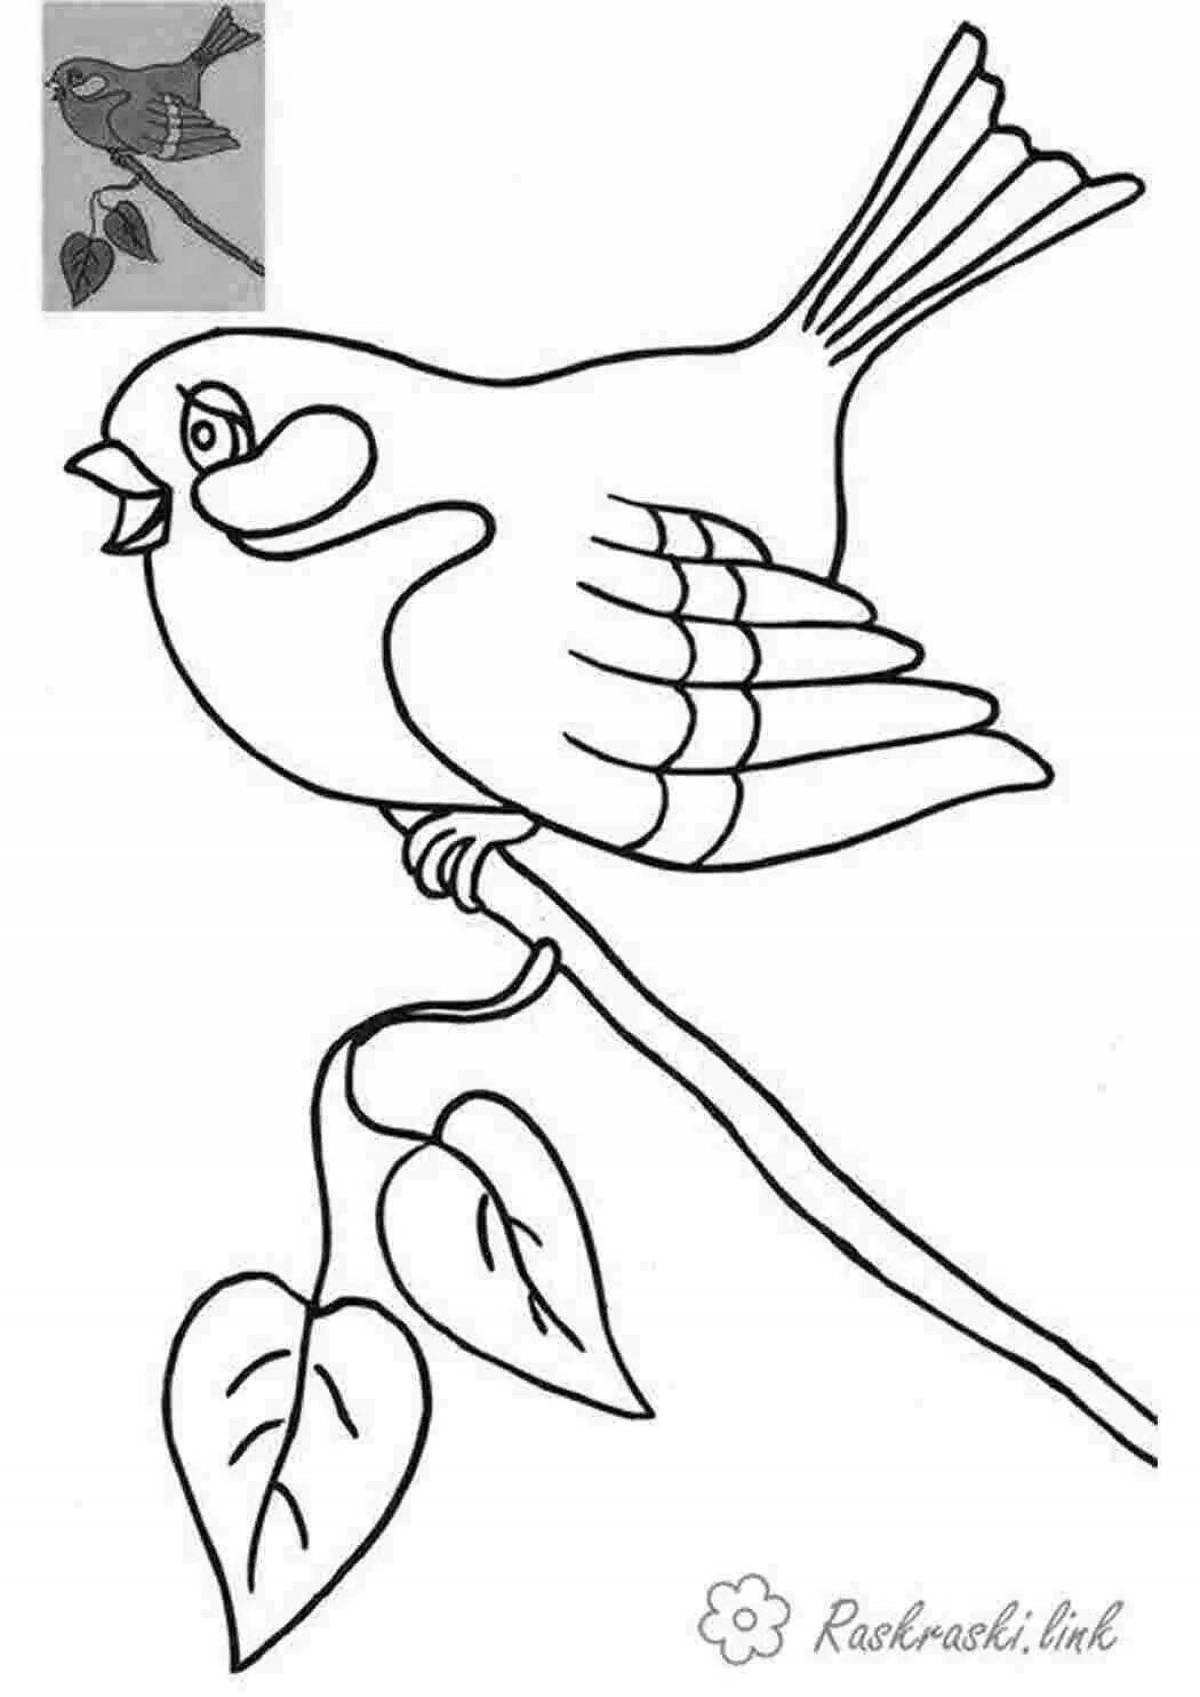 Creative sparrow coloring book for 2-3 year olds